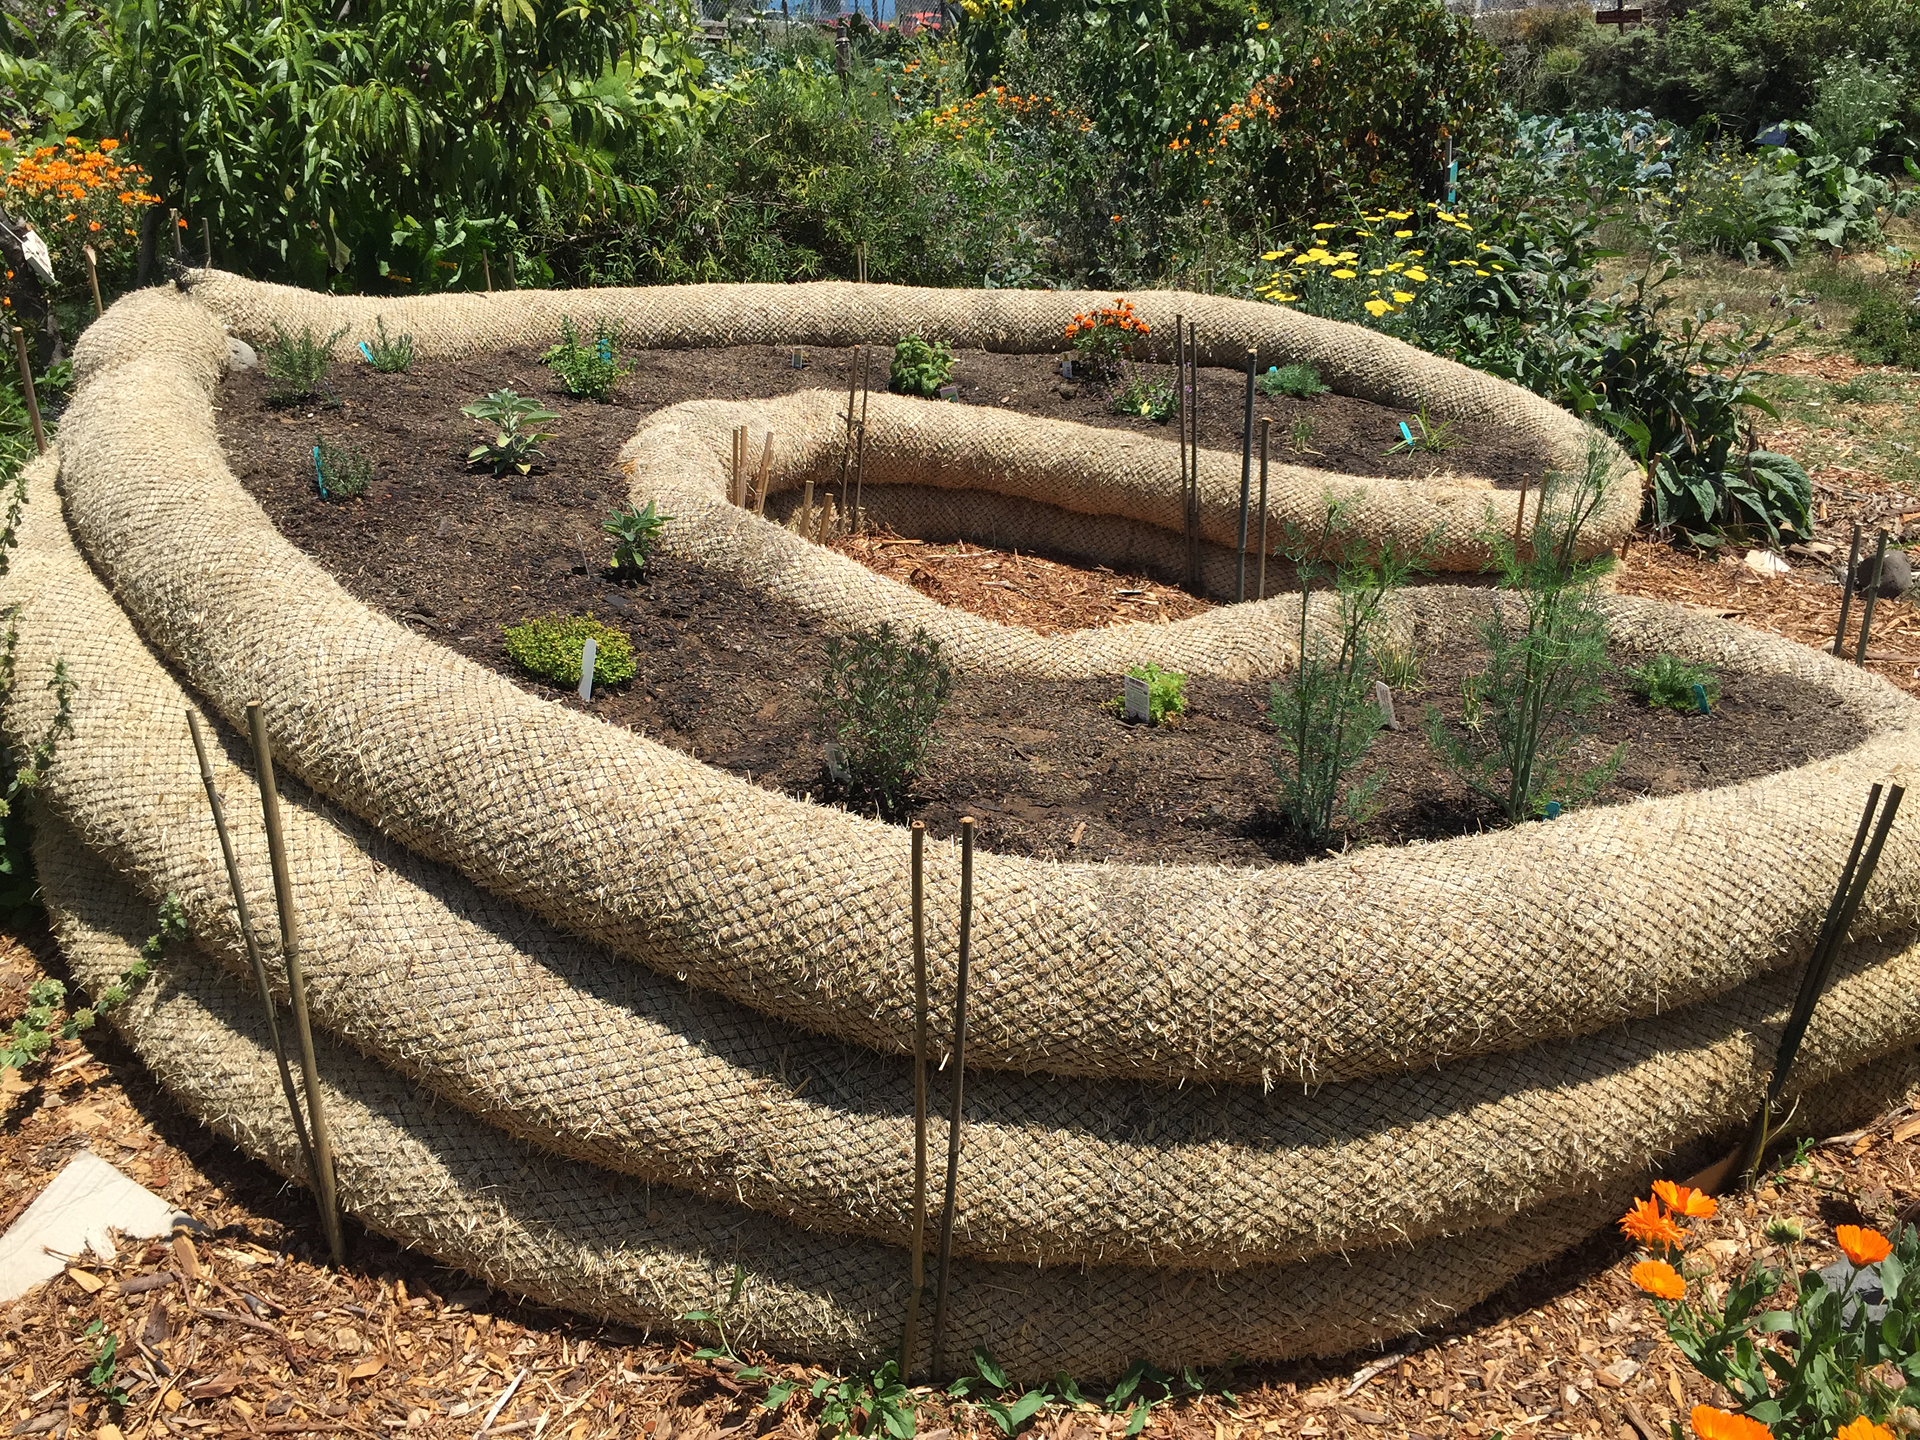 This keyhole raised bed, in which herbs are growing, is made out of straw wattles. It was a student project to experiment with cheaper solutions than planter boxes to grow above ground. 